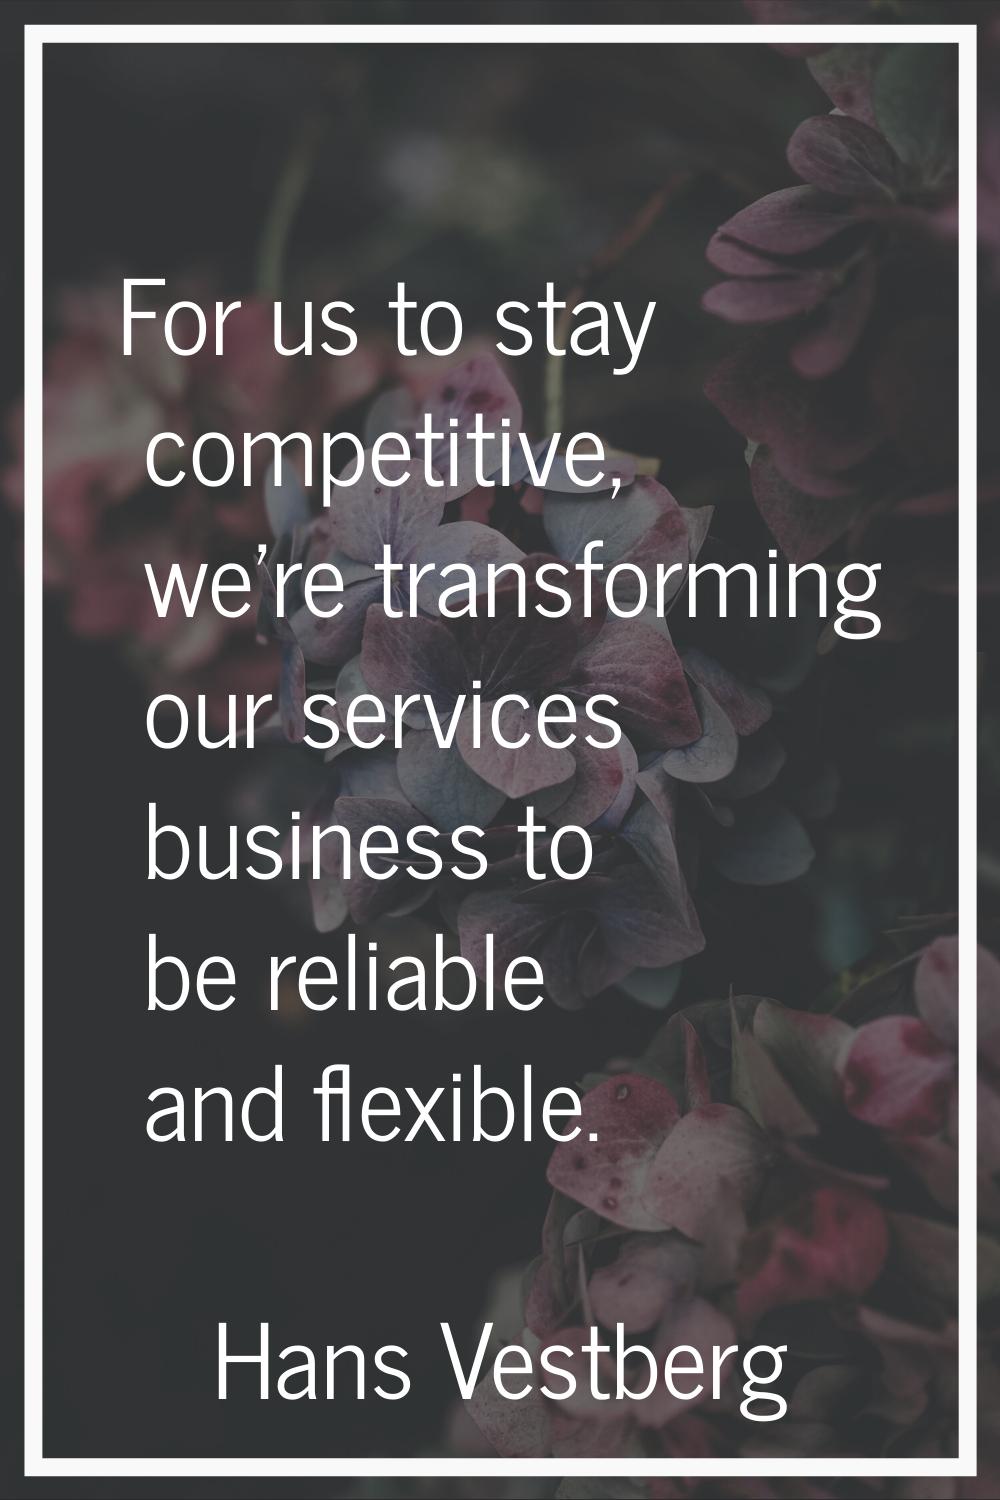 For us to stay competitive, we're transforming our services business to be reliable and flexible.